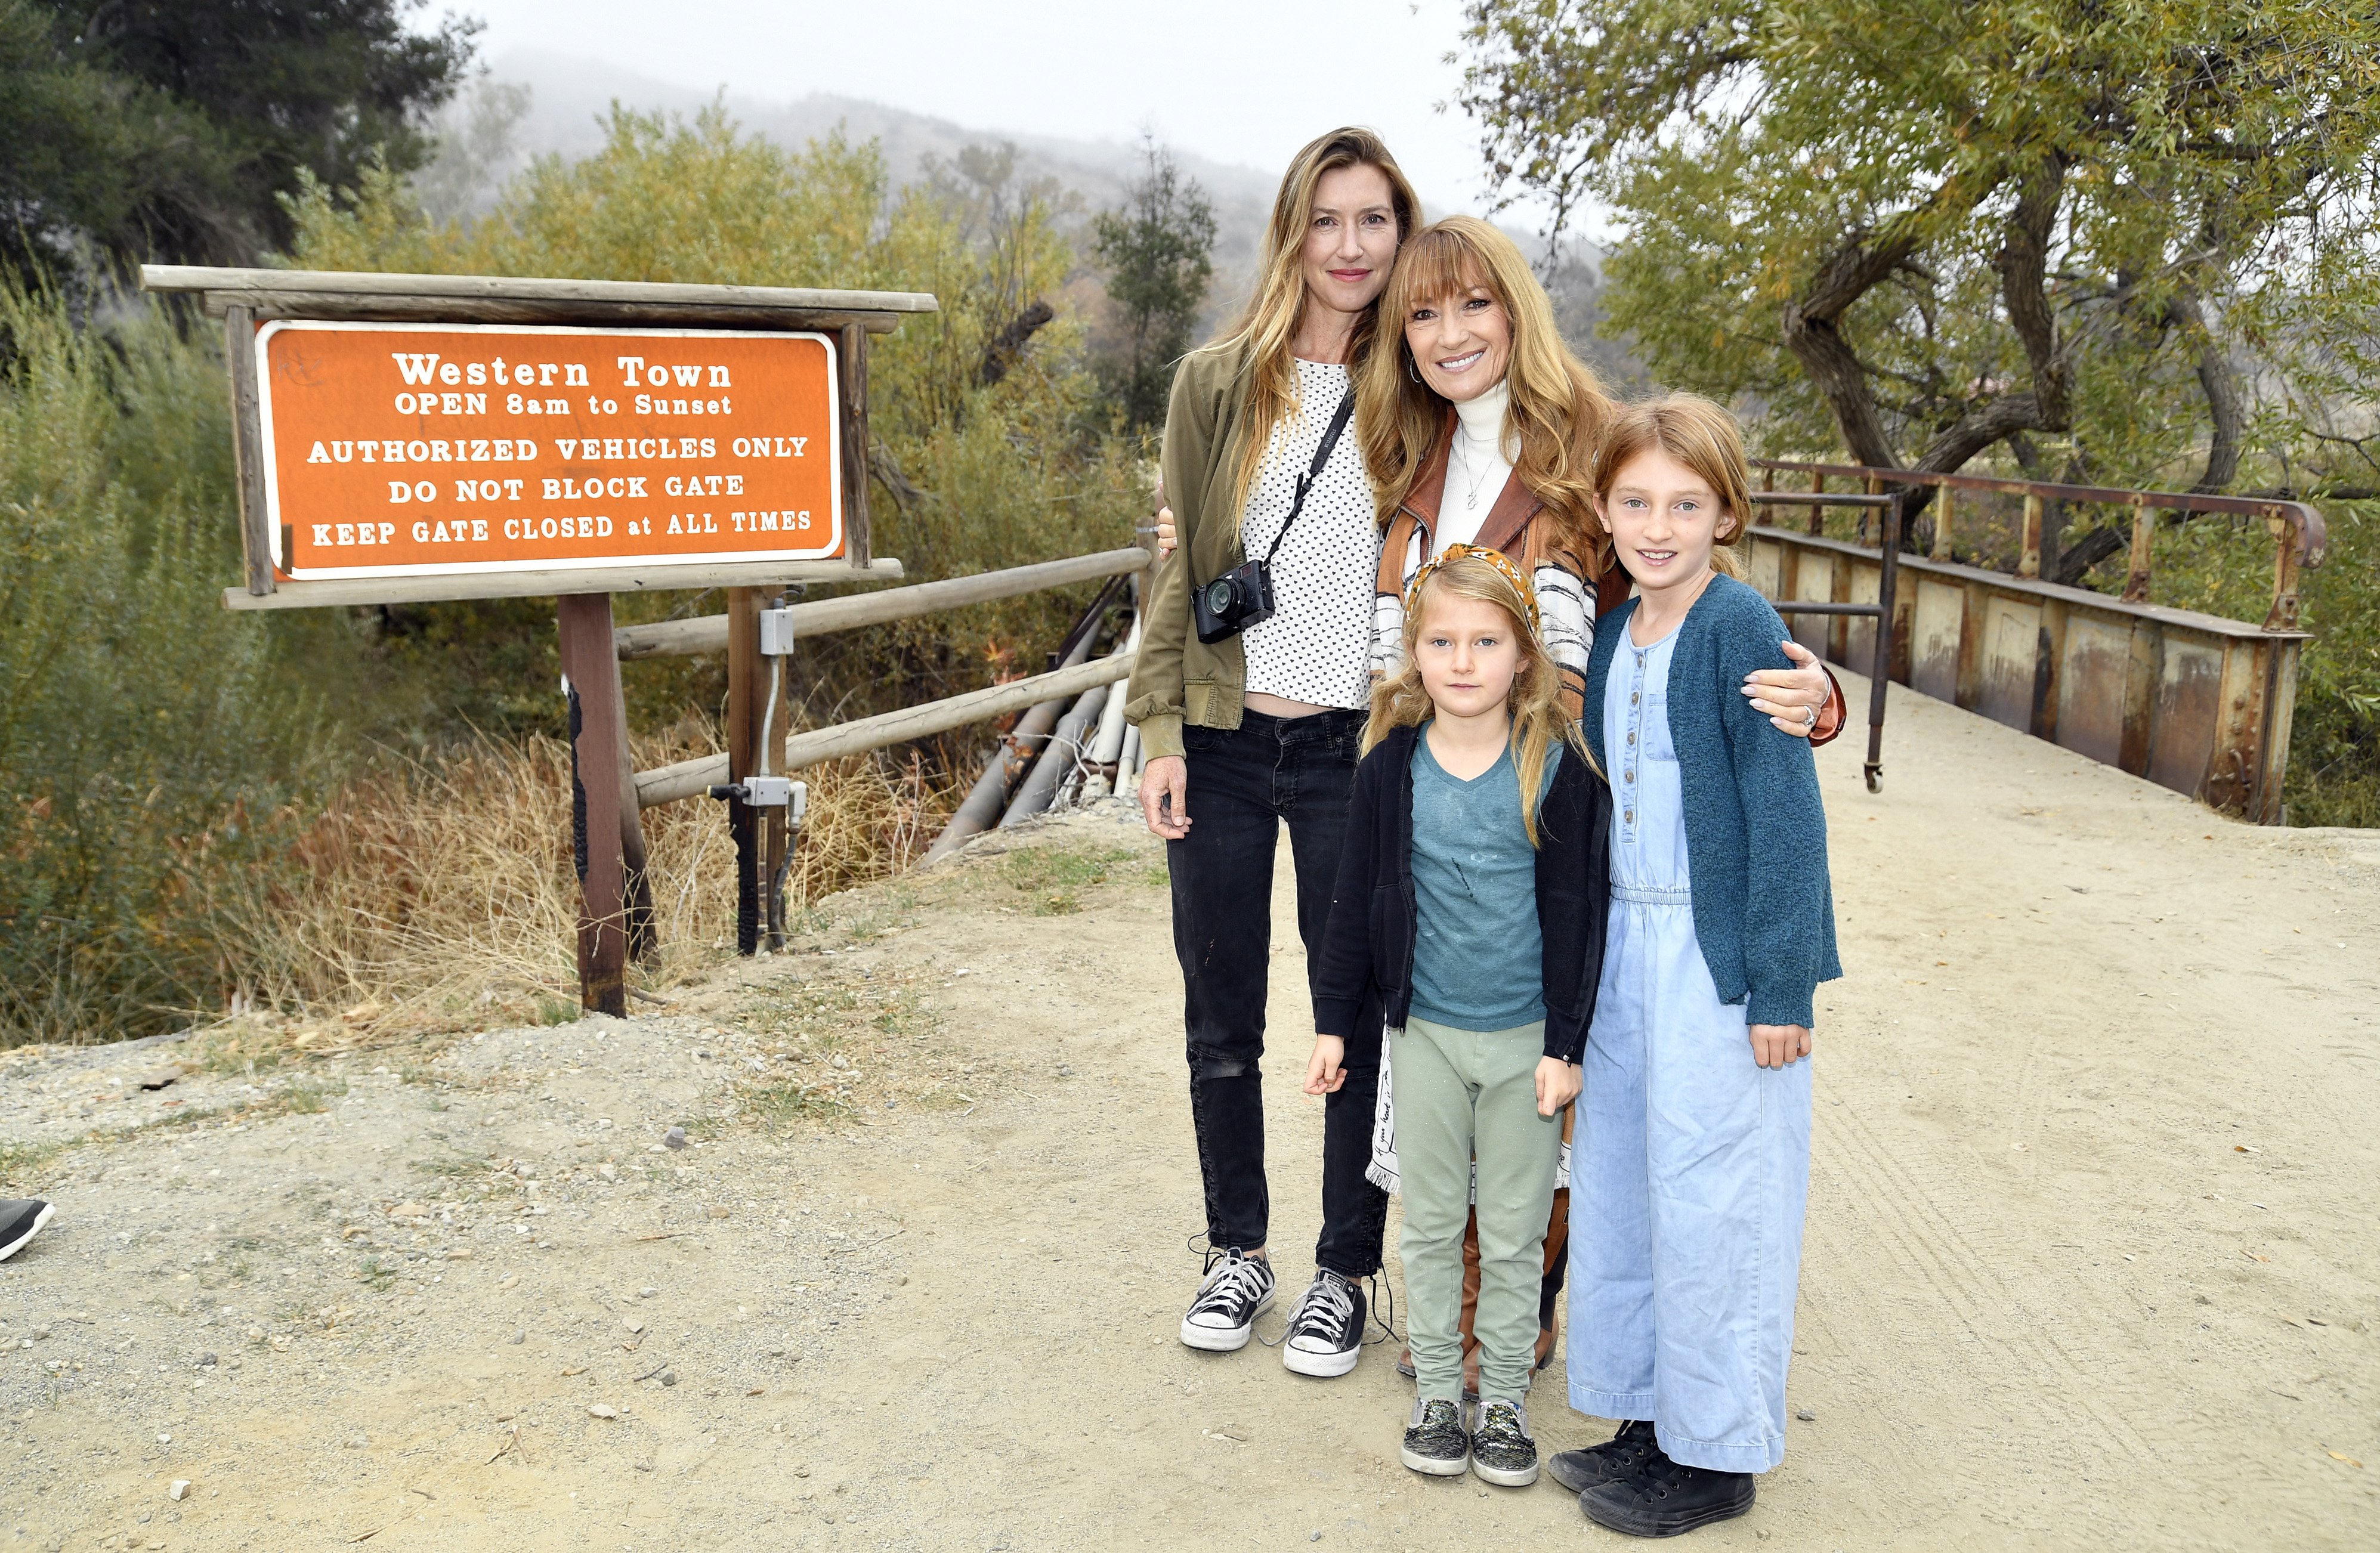 Katie Flynn, Jane Seymour and family attend the Open Hearts Foundation's Young Hearts volunteer experience supporting the eco-restoration of Paramount Ranch at Paramount Ranch on December 04, 2021 in Agoura Hills, California | Source: Getty Images